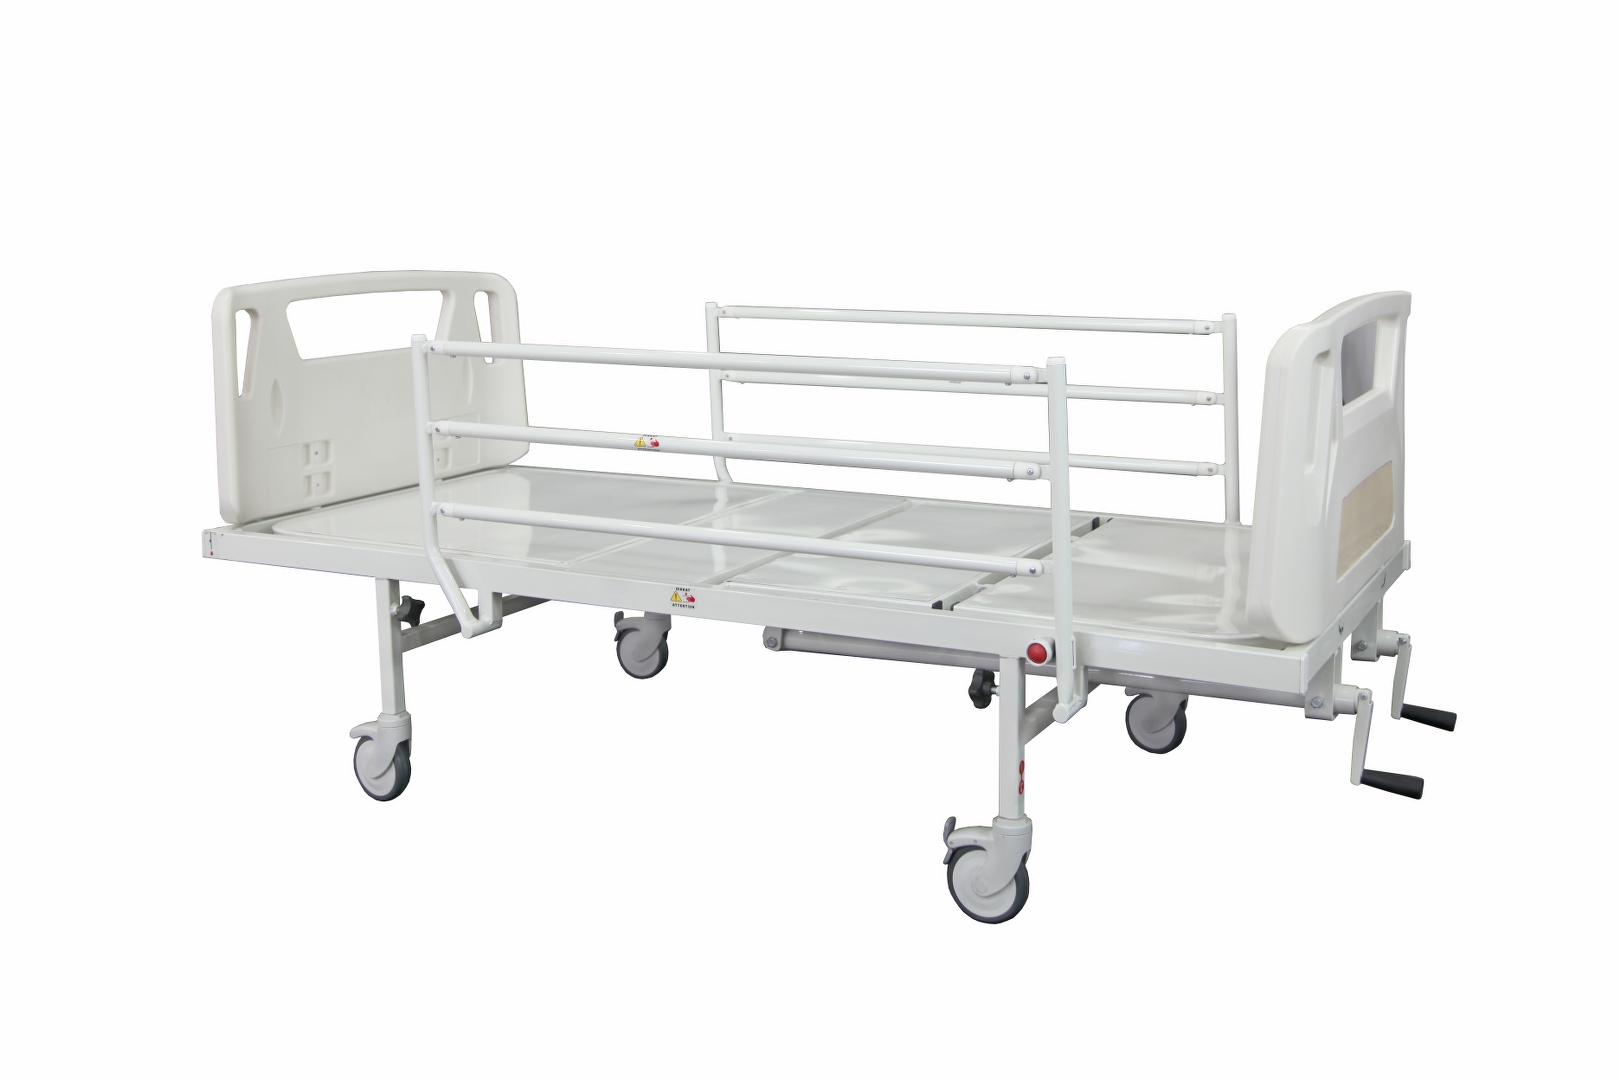 HKM-CC20 MECHANICAL HOSPITAL BED WITH 2 ADJUSTMENT